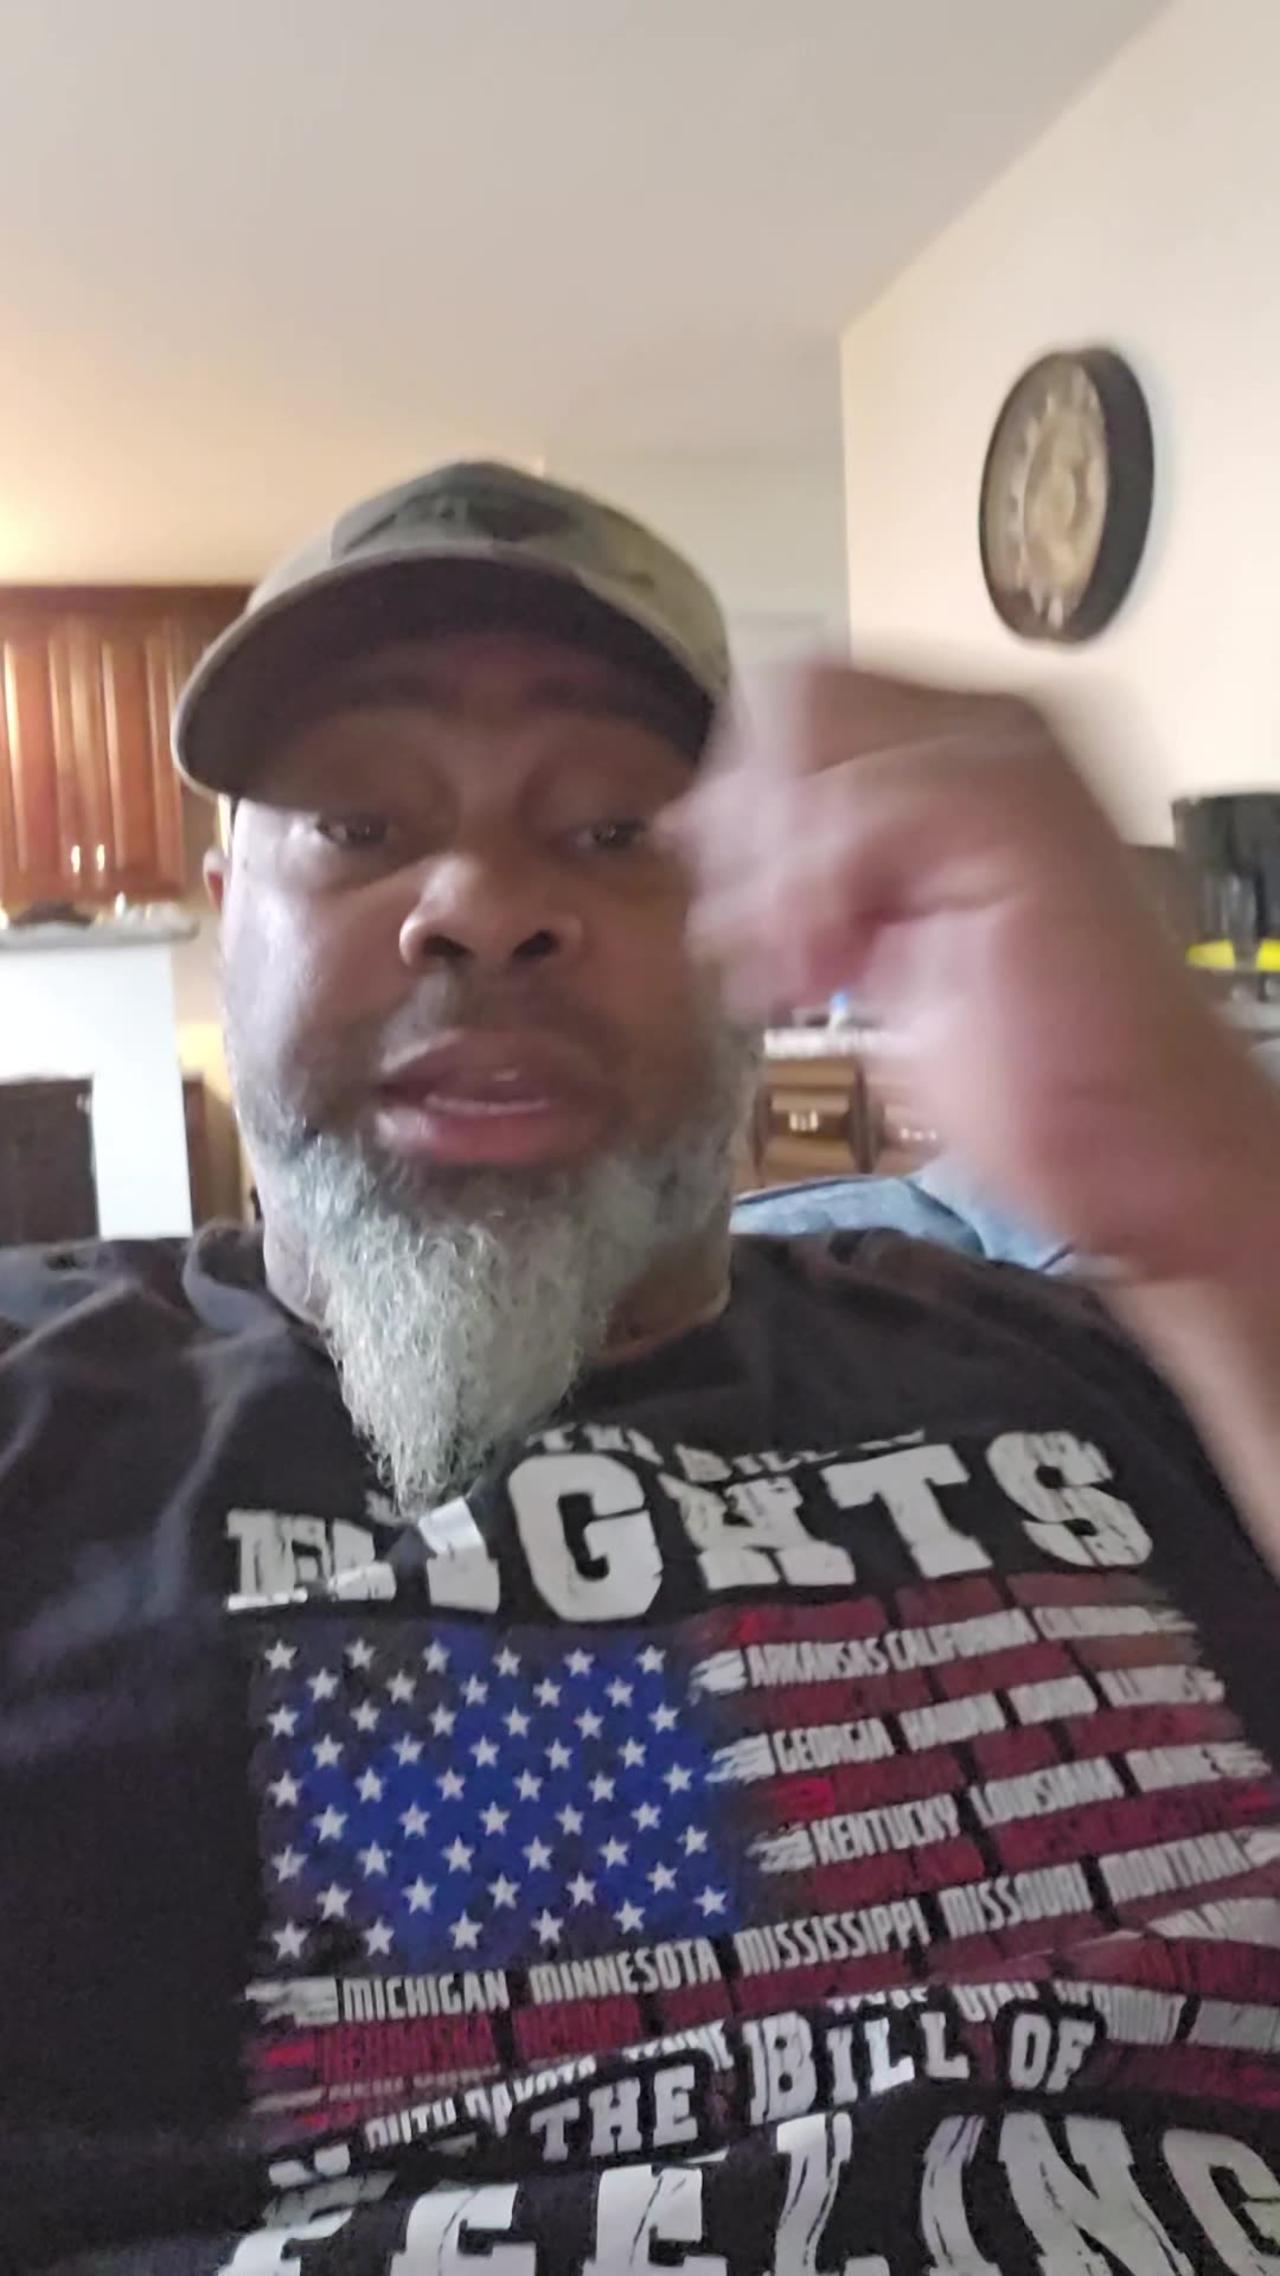 Texas needs to call up militia, not National - One News Page VIDEO